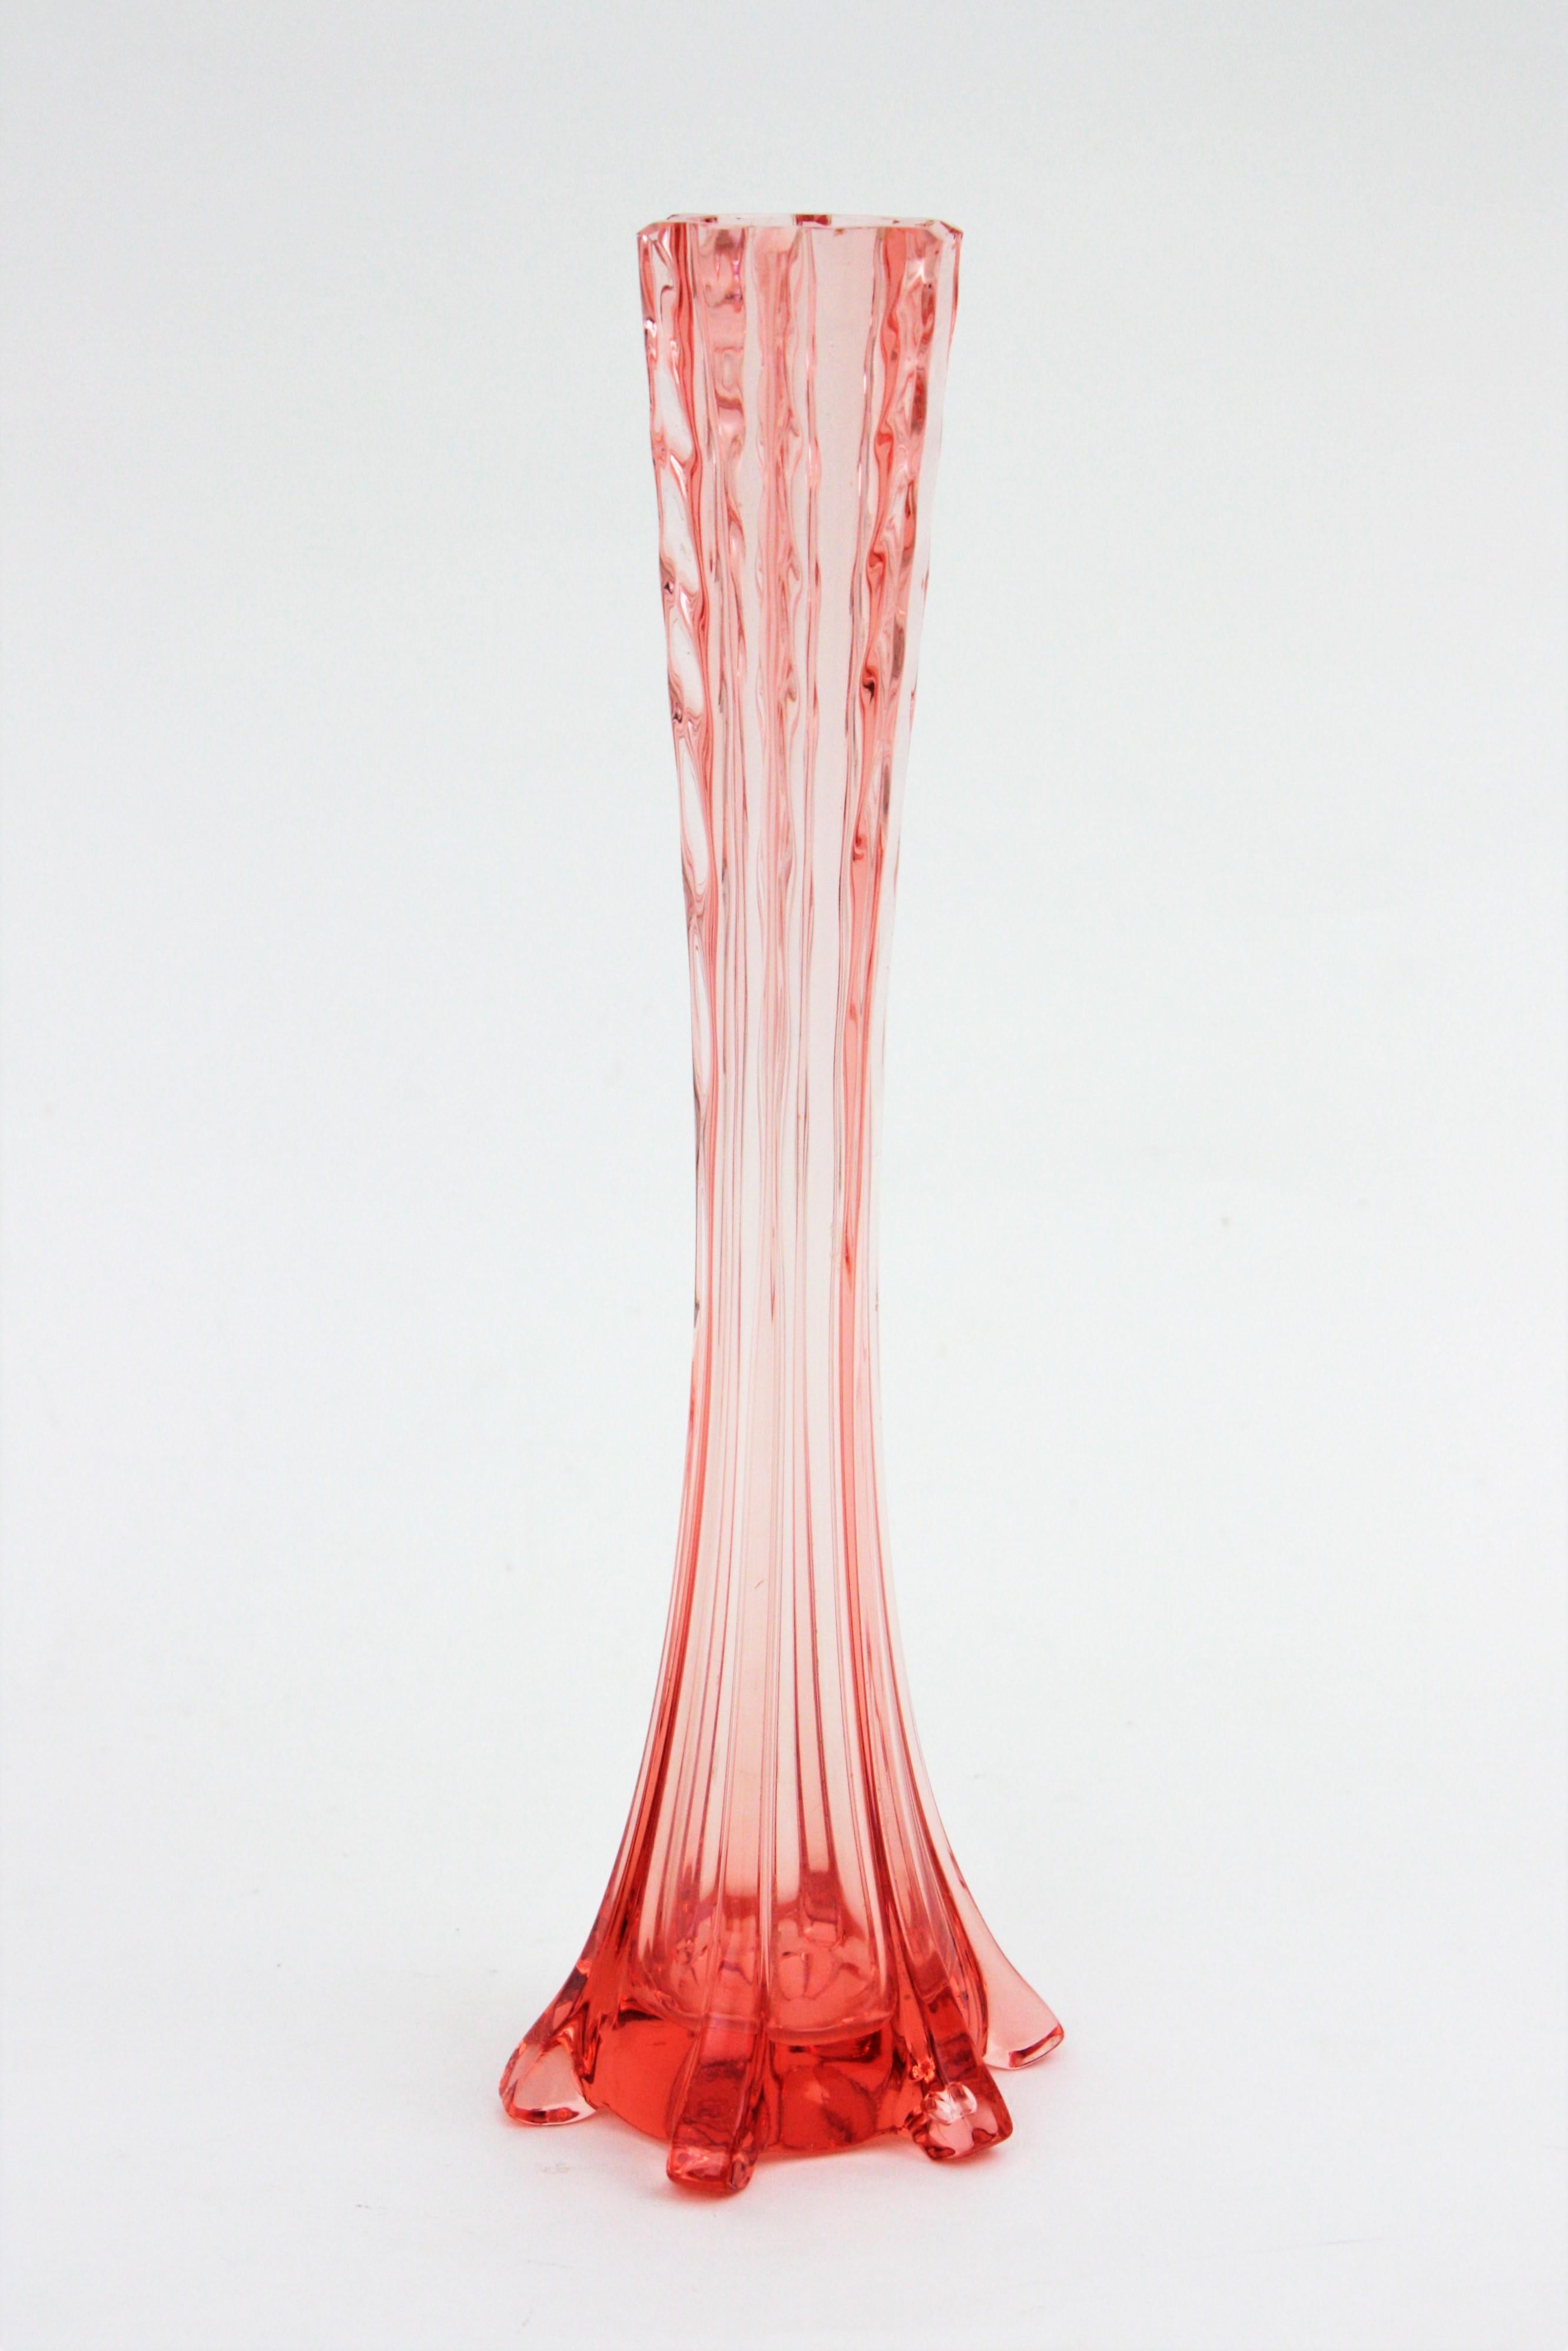 French Art Deco Blown Glass Pink Amberina Single Flower Vase For Sale 1